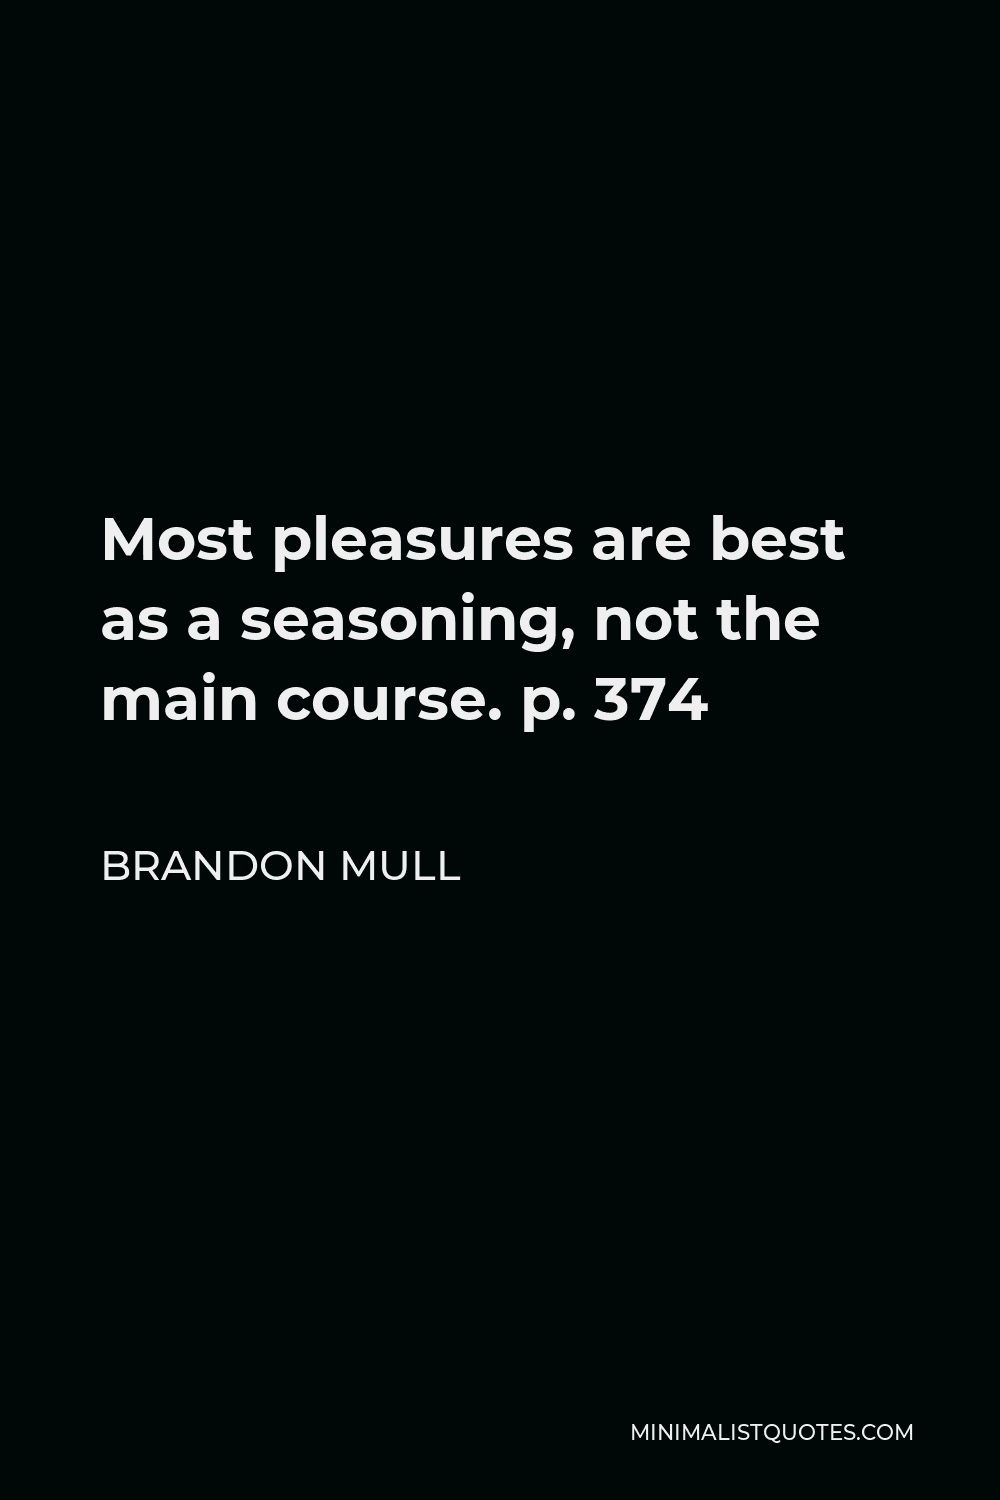 Brandon Mull Quote - Most pleasures are best as a seasoning, not the main course. p. 374